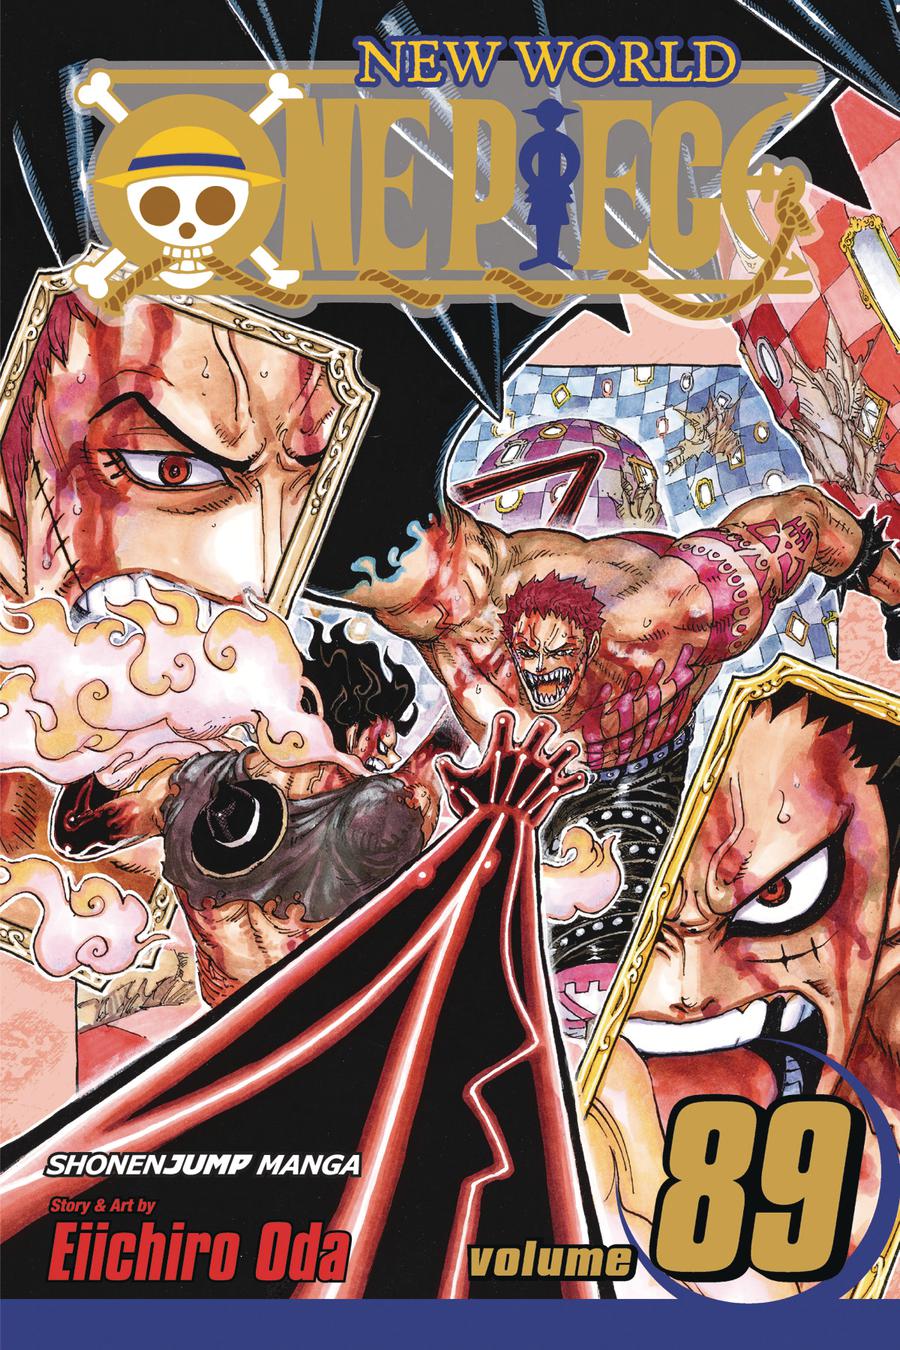 One Piece Vol 89 New World GN